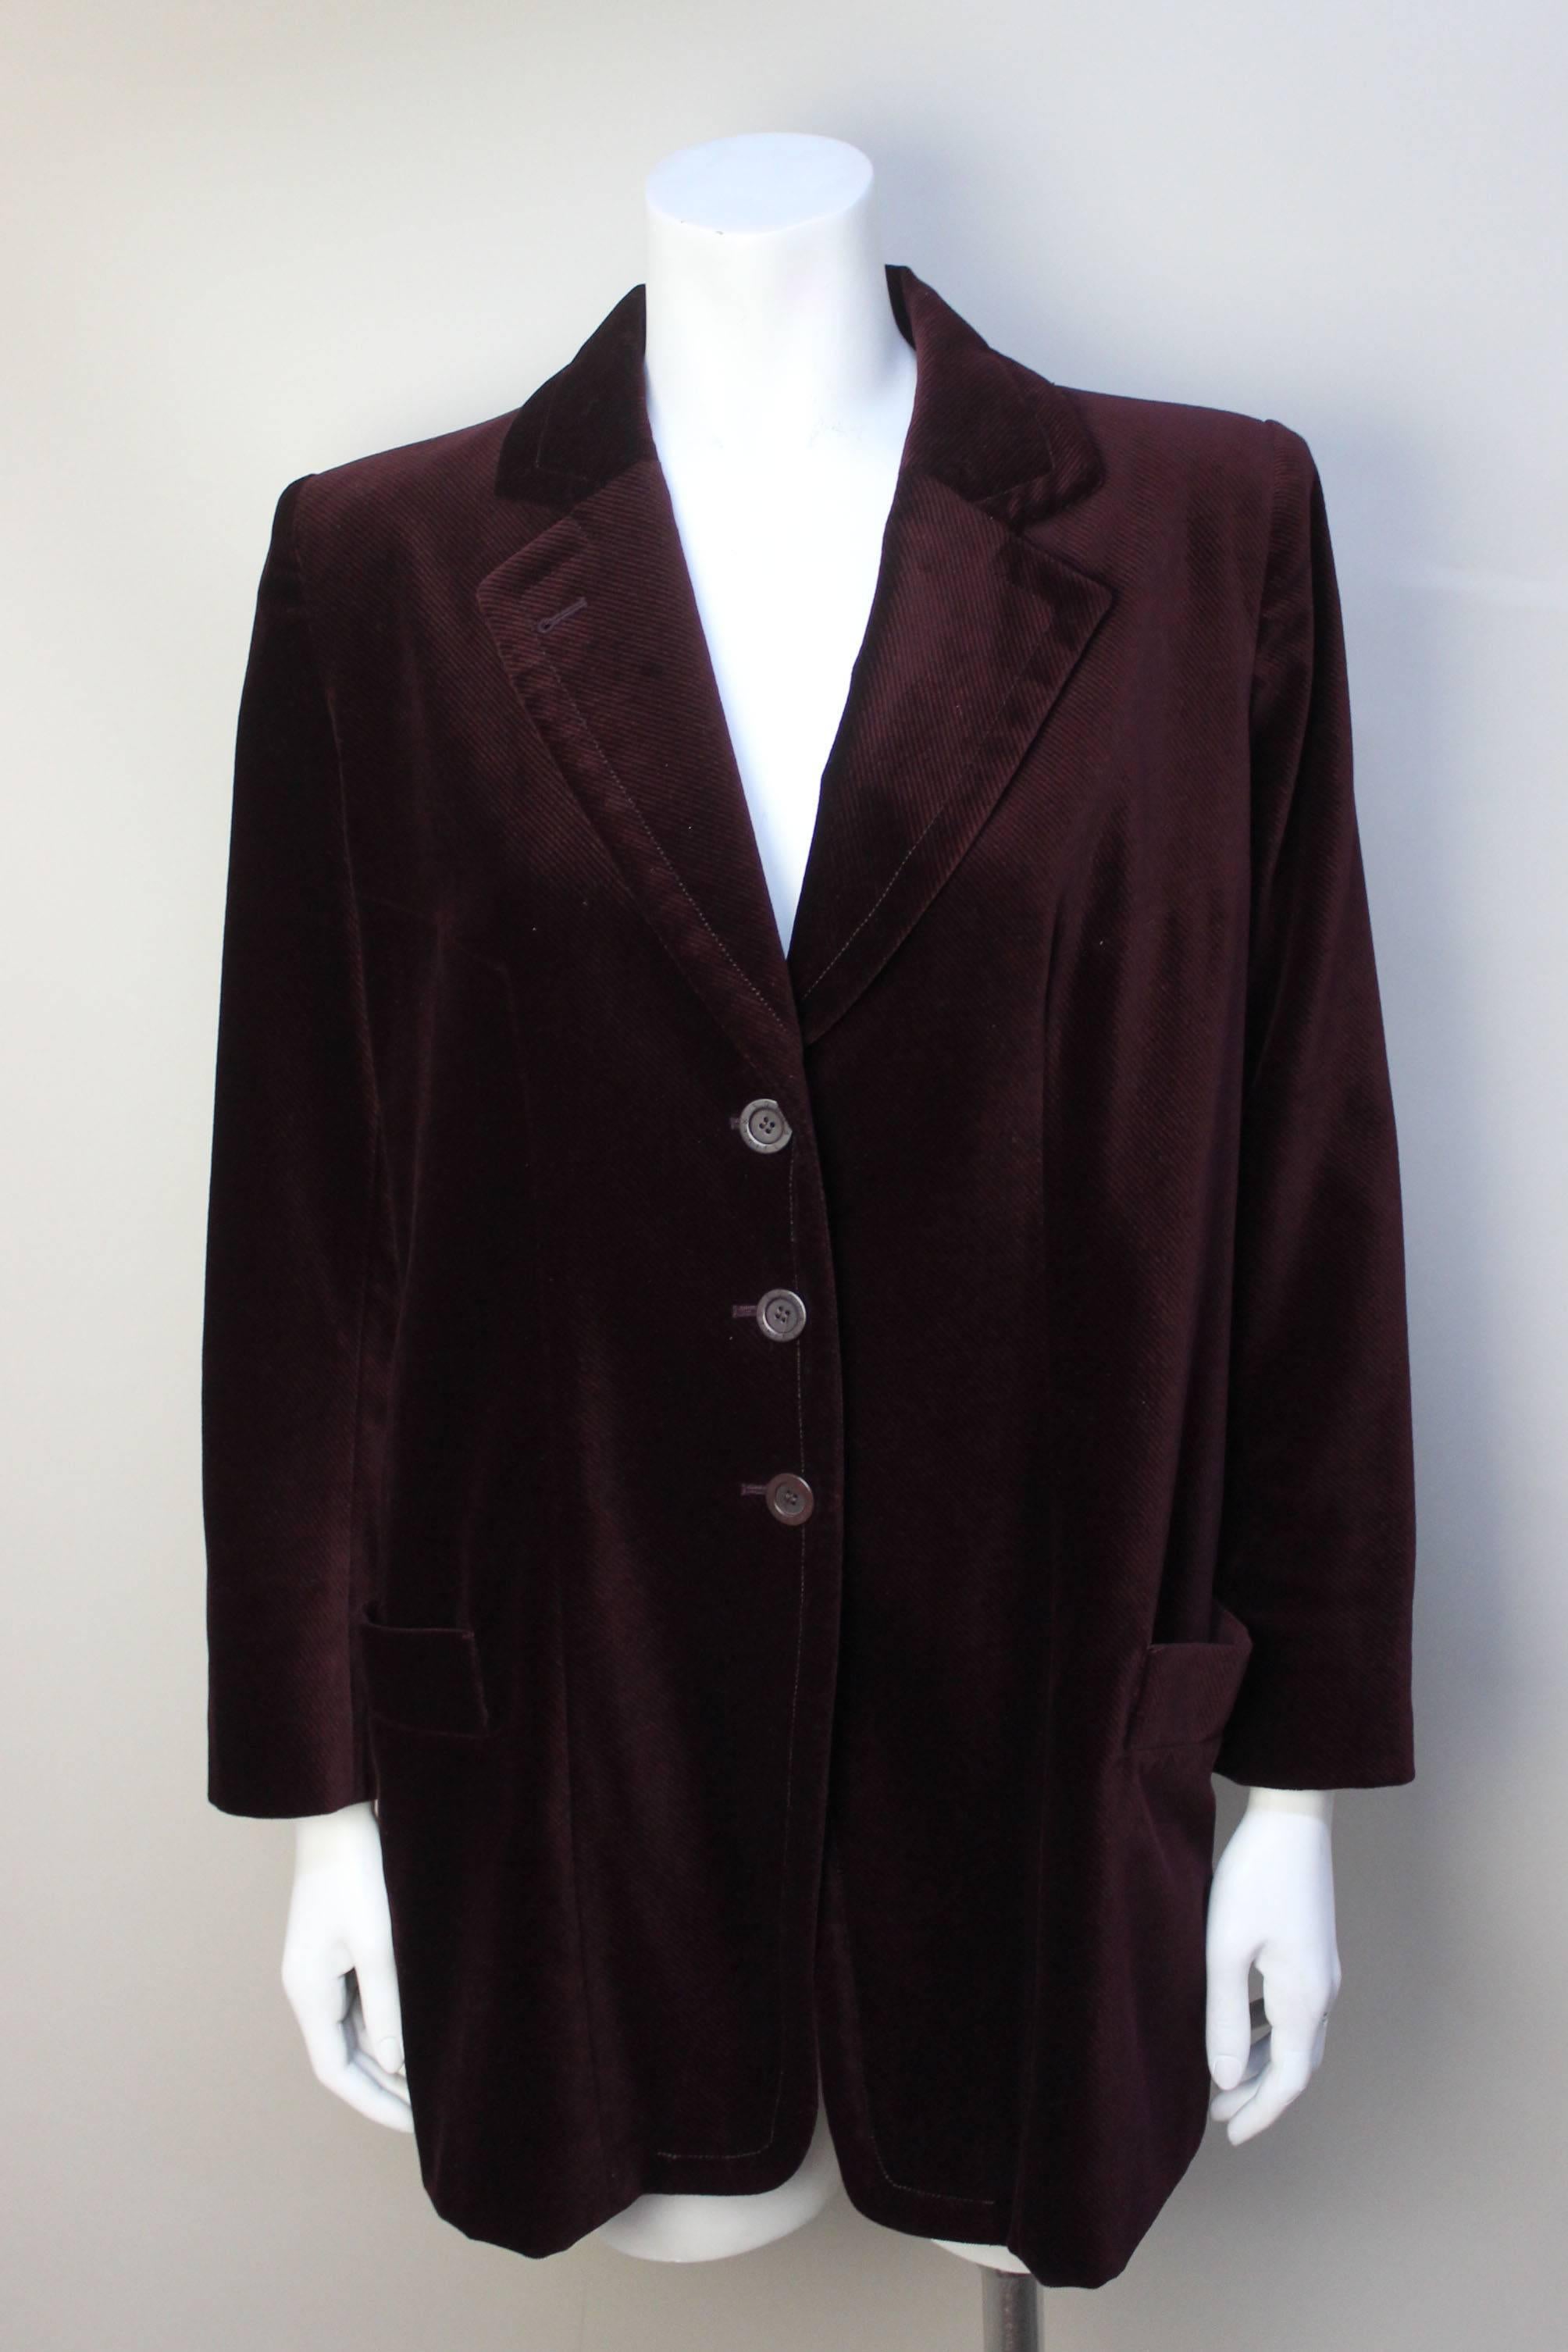 This lush burgundy velvet jacket is in the style of a mens frock coat. It has peaked lapels and two patch pockets. There is a nice added detial of four logo buttons on each sleeve. It is fully lined in a fine salmon pinstripe rayon. 